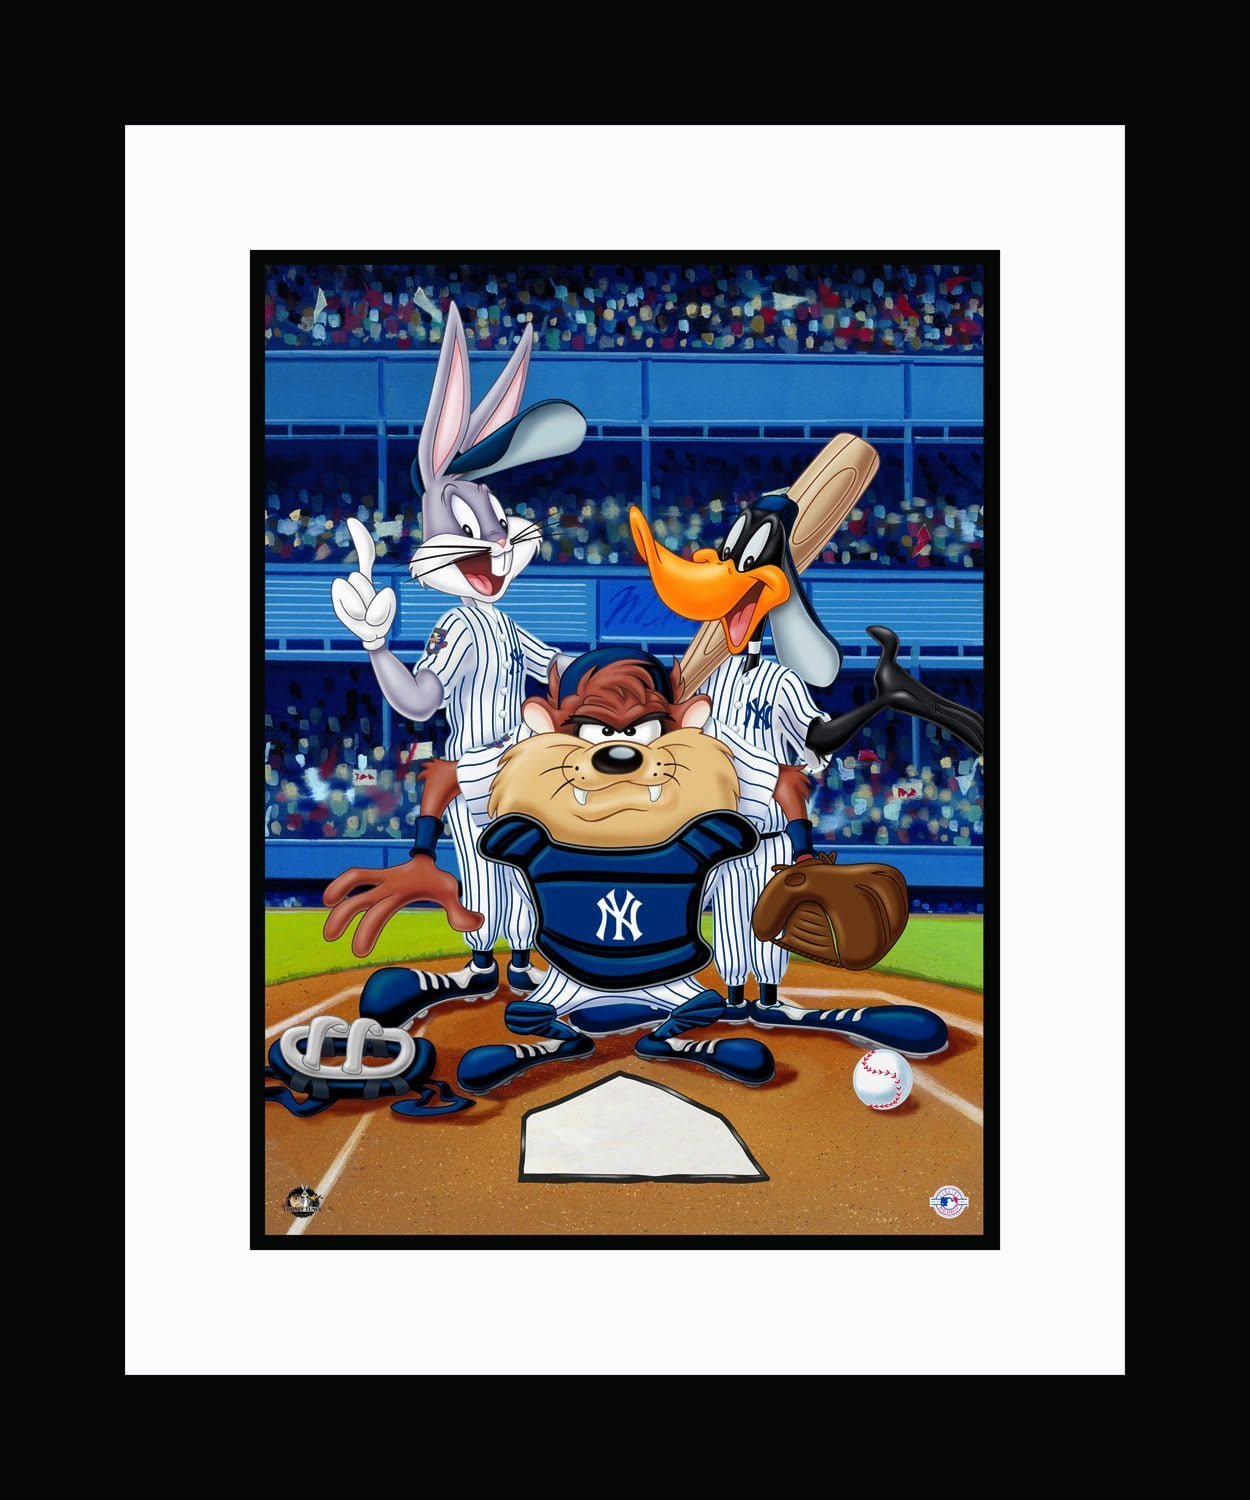 At The Plate - New York Yankees - Framed Fine Art Giclee - Classic